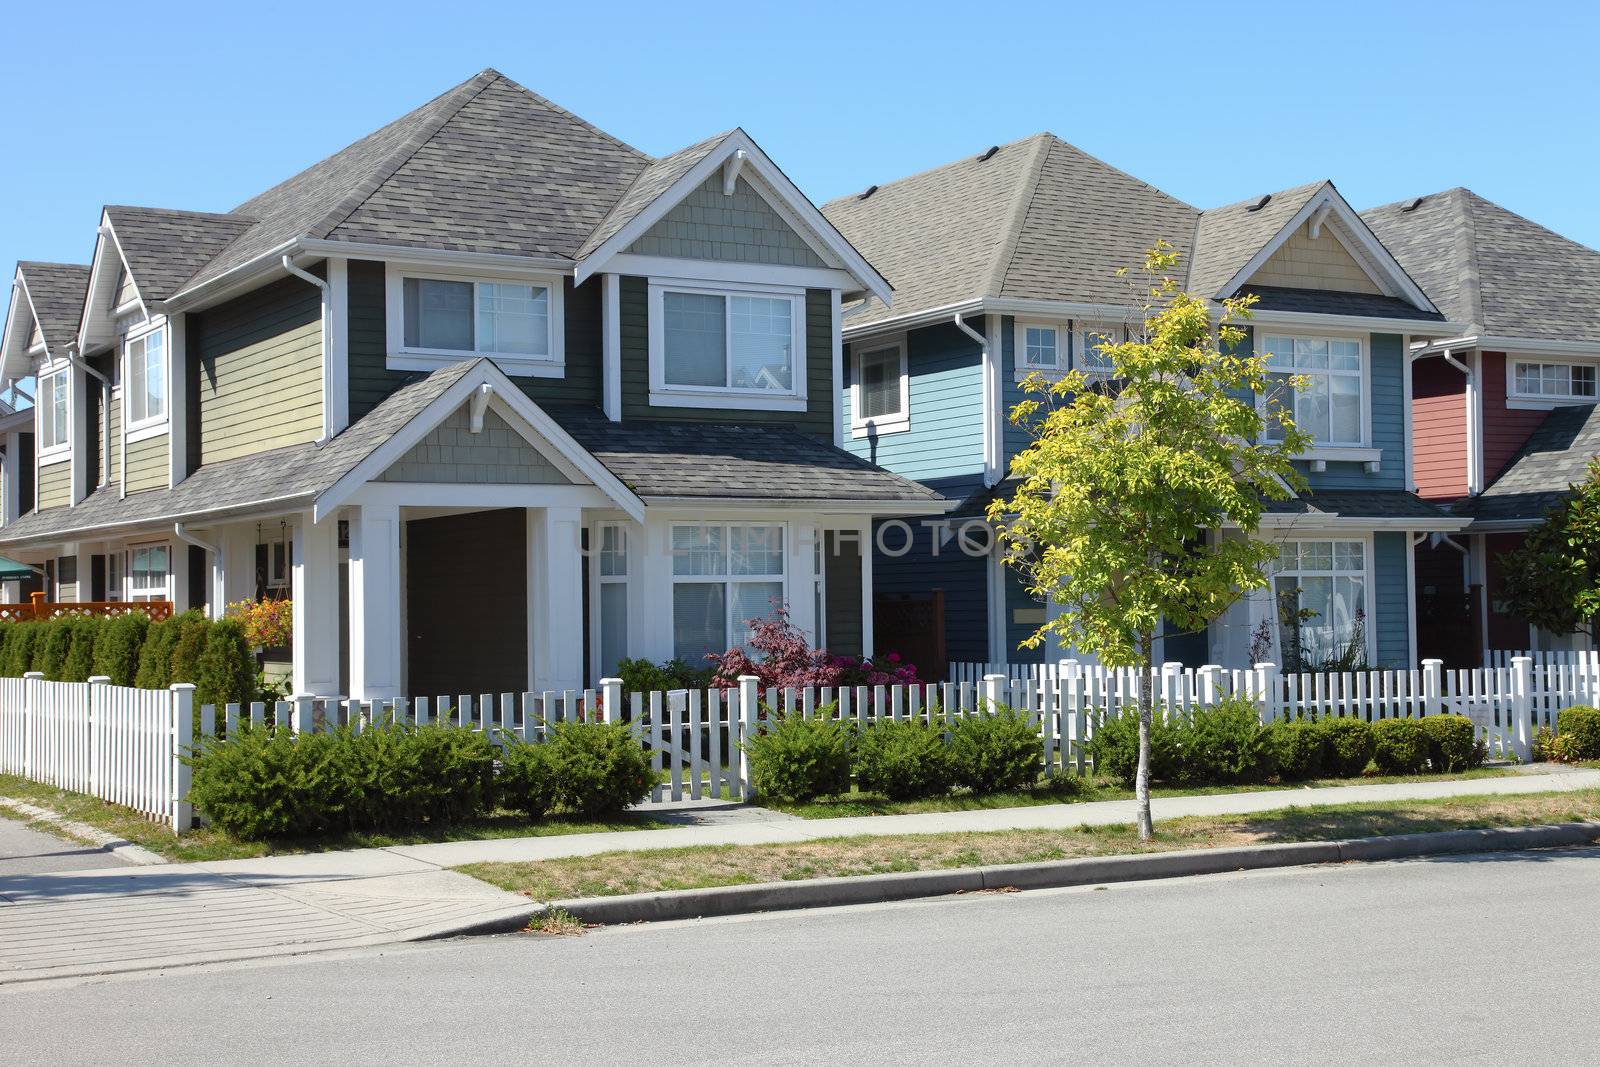 Residences in South Richmond BC a close neighborhood.